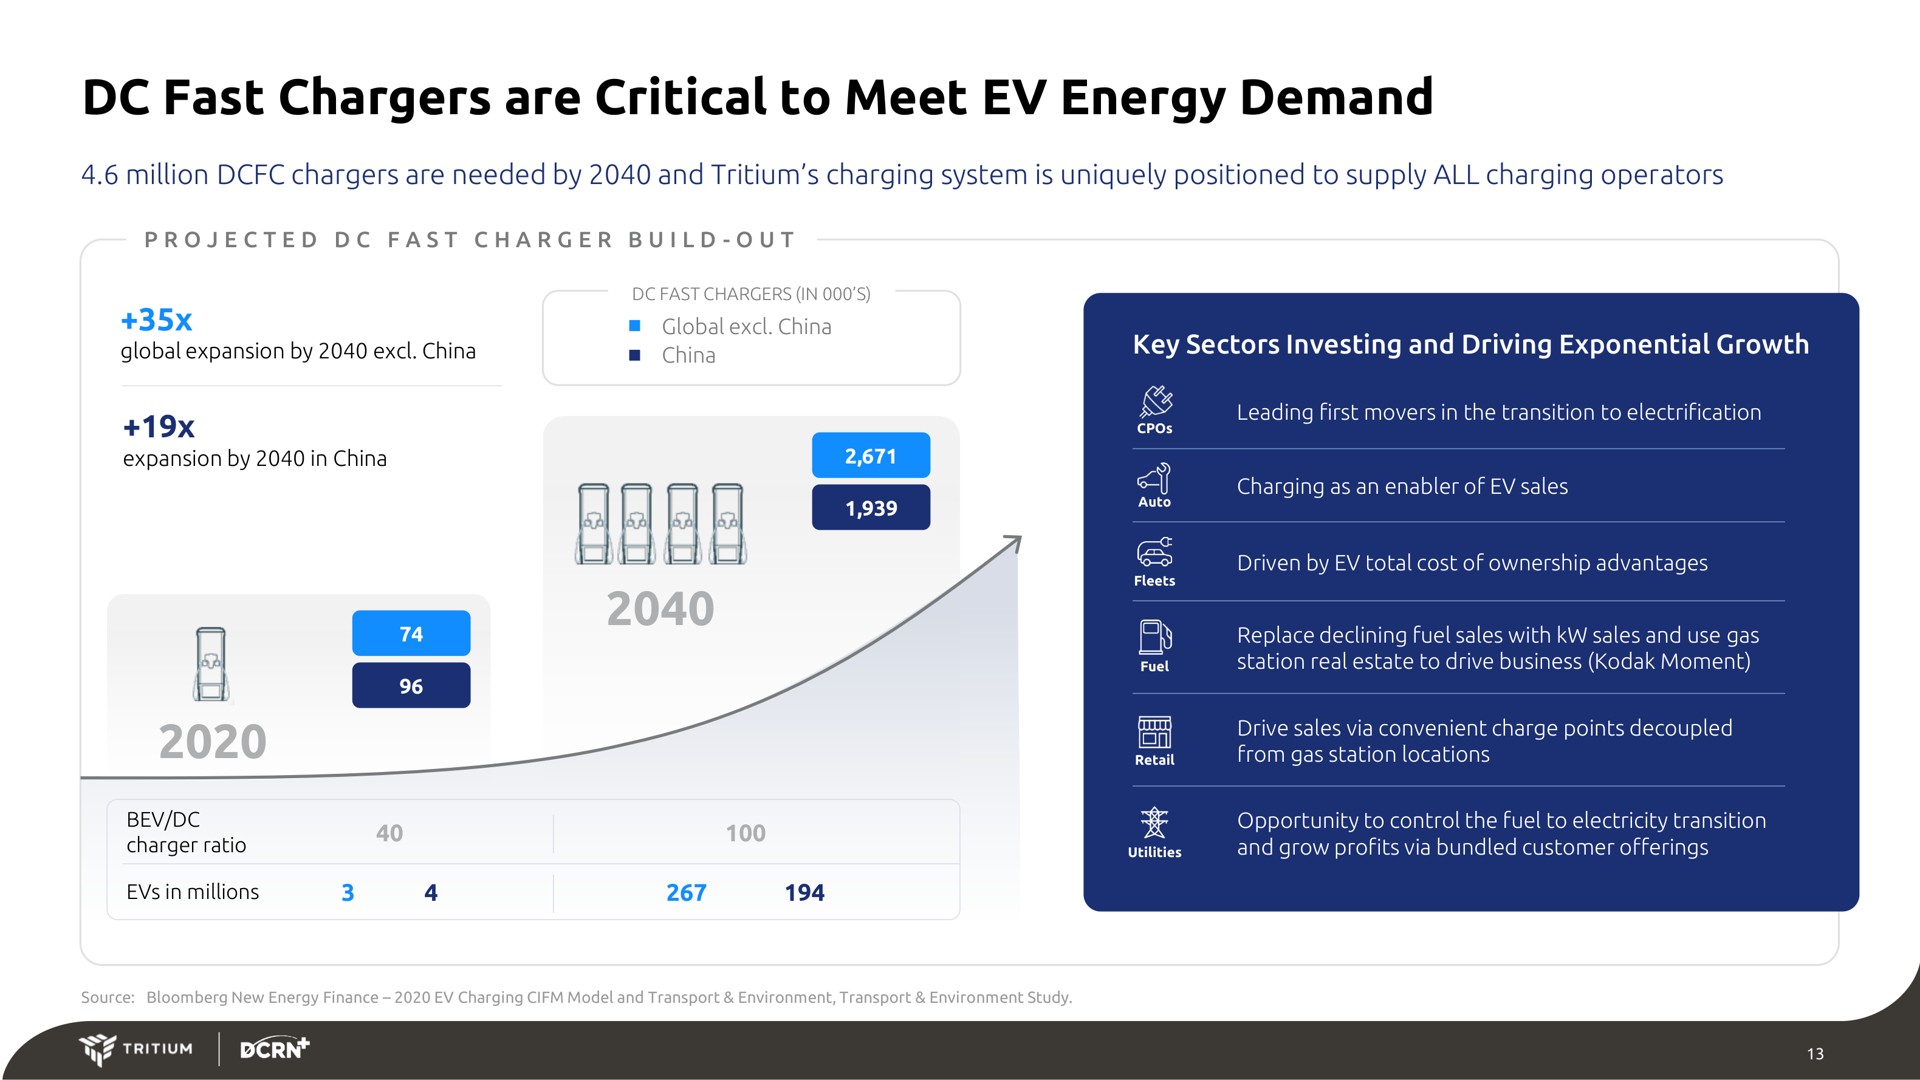 fast chargers are critical to meet energy demand arty | Tritium